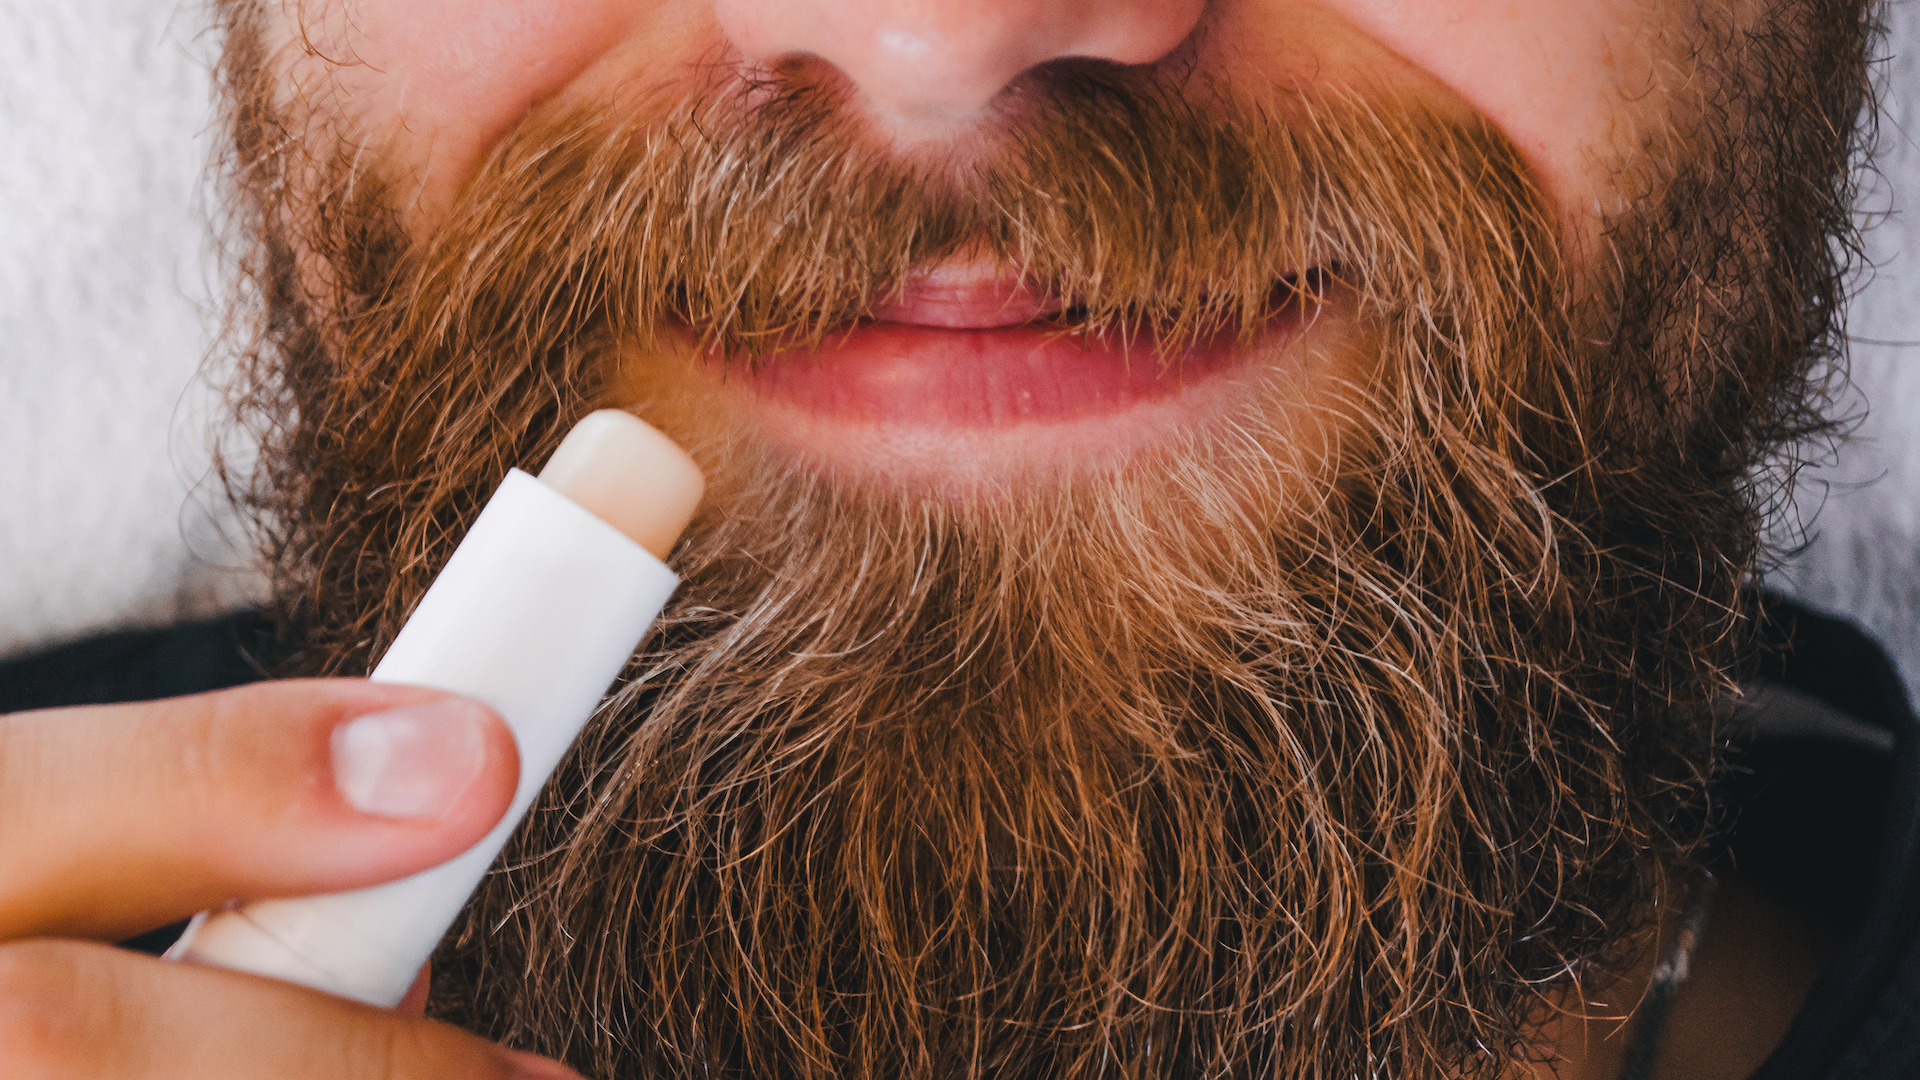 A bearded man putting on some lip balm